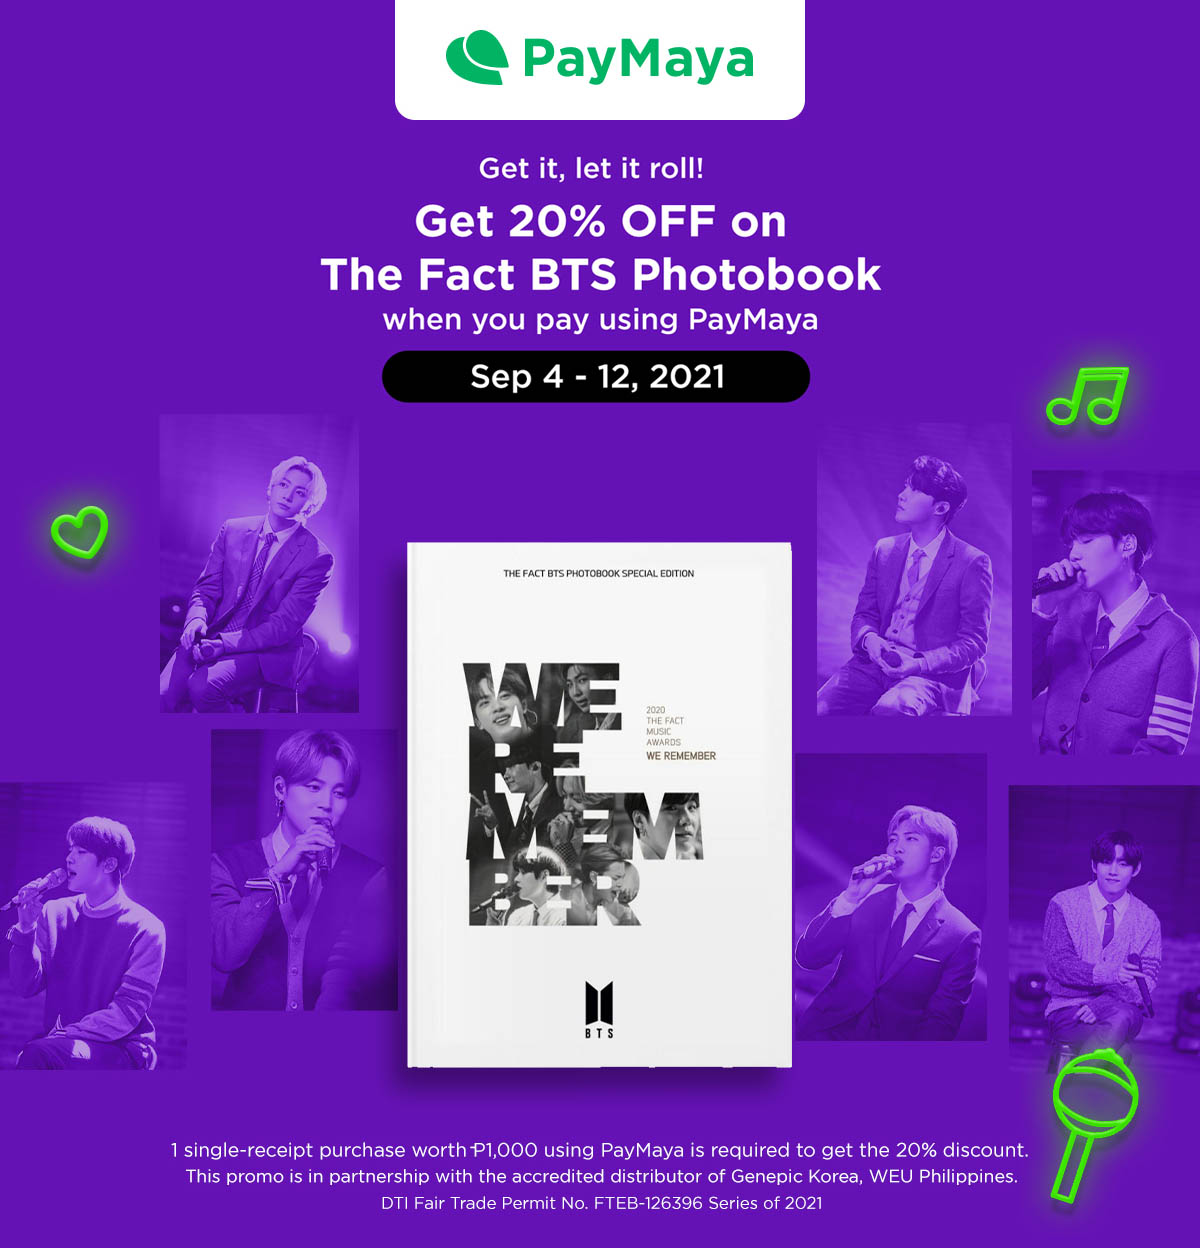 Here’s how you can get an exclusive discount on The Fact BTS Photobook with PayMaya!